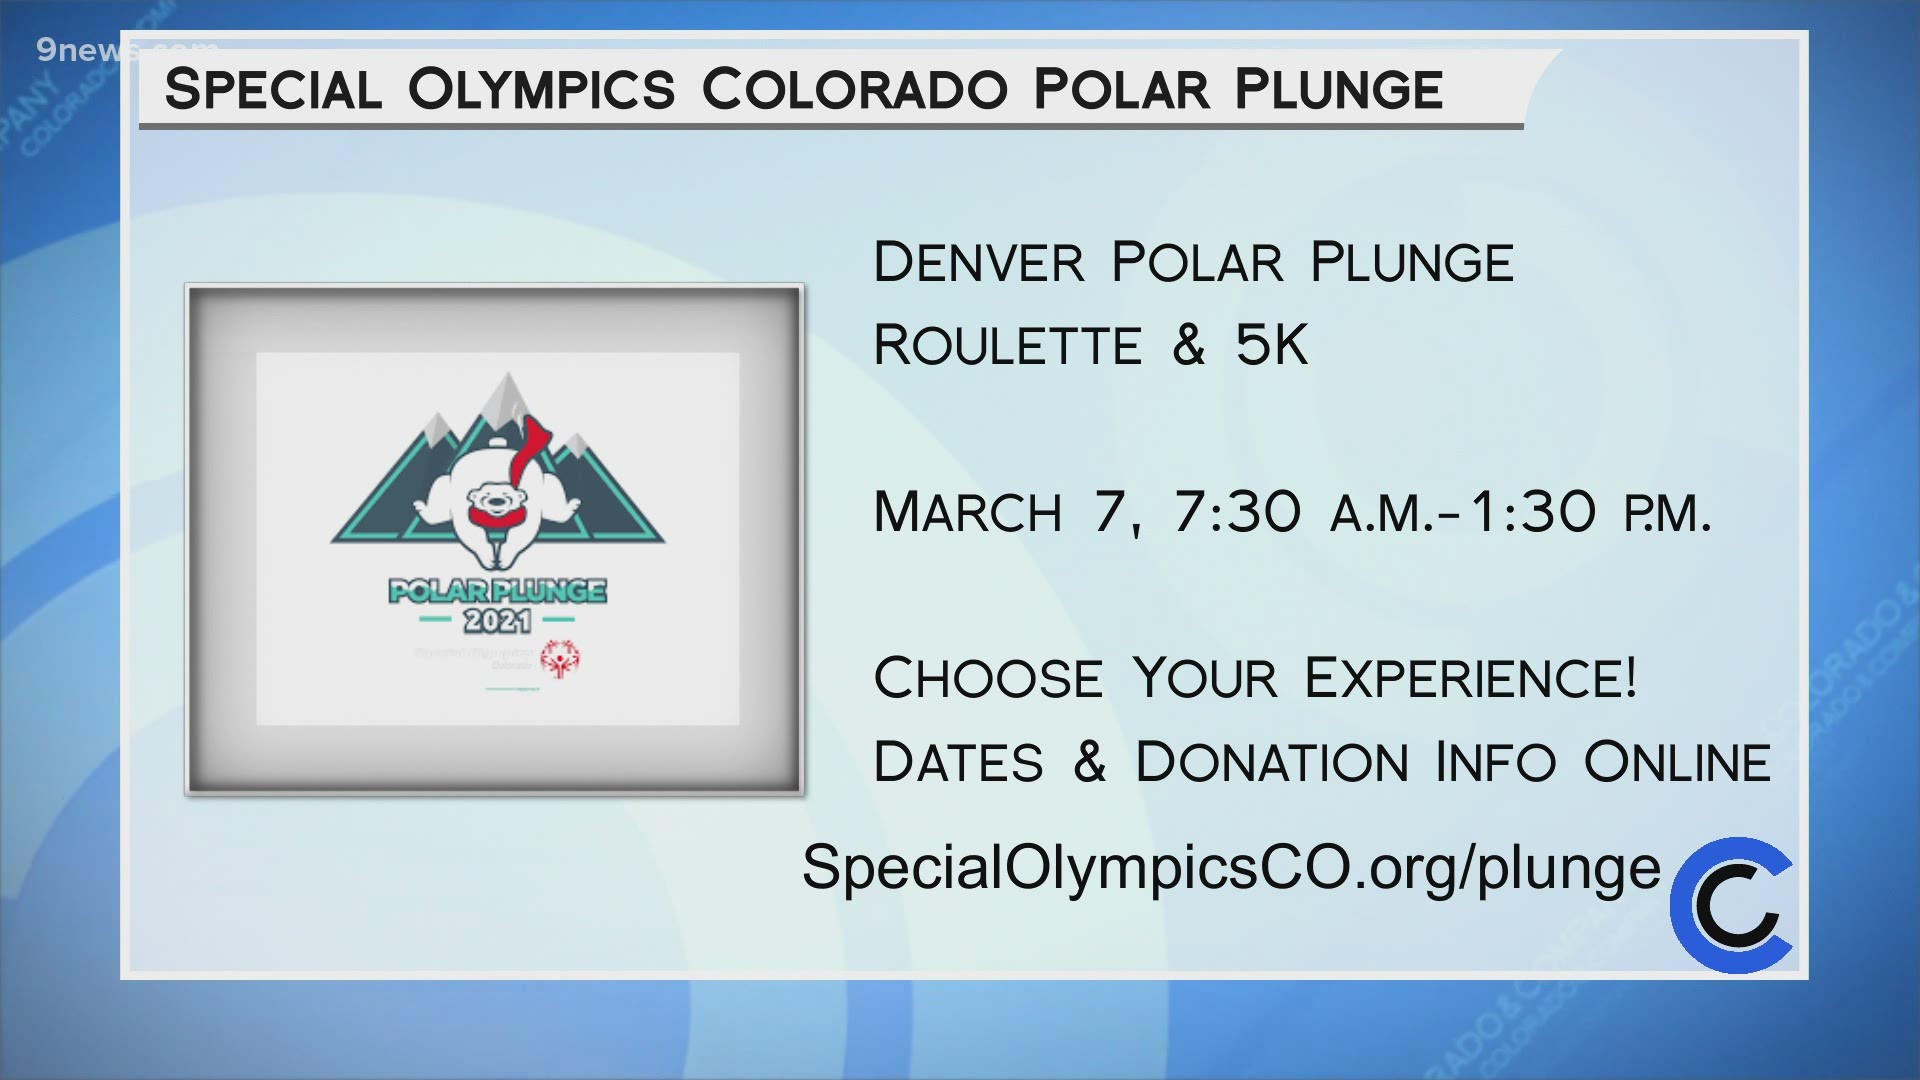 Plunge in person, virtually or just chill at home for a great cause. Learn more about donating and getting involved at SpecialOlympicsCO.org/plunge.